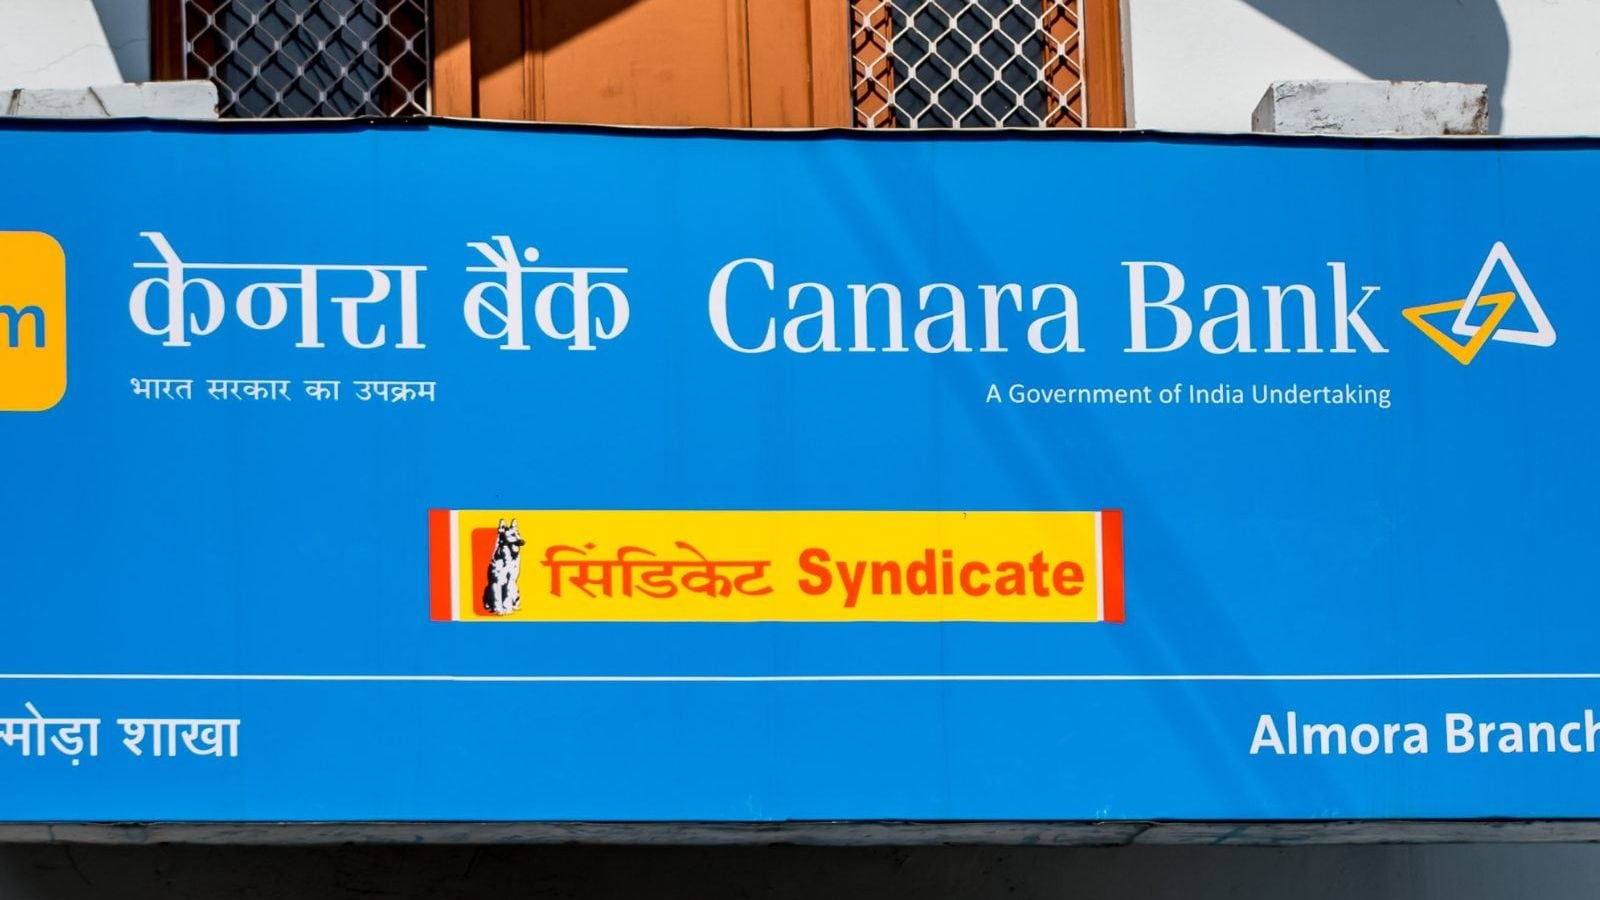 Canara Bank Launches Special Fixed Deposit Scheme See FD Interest Rate